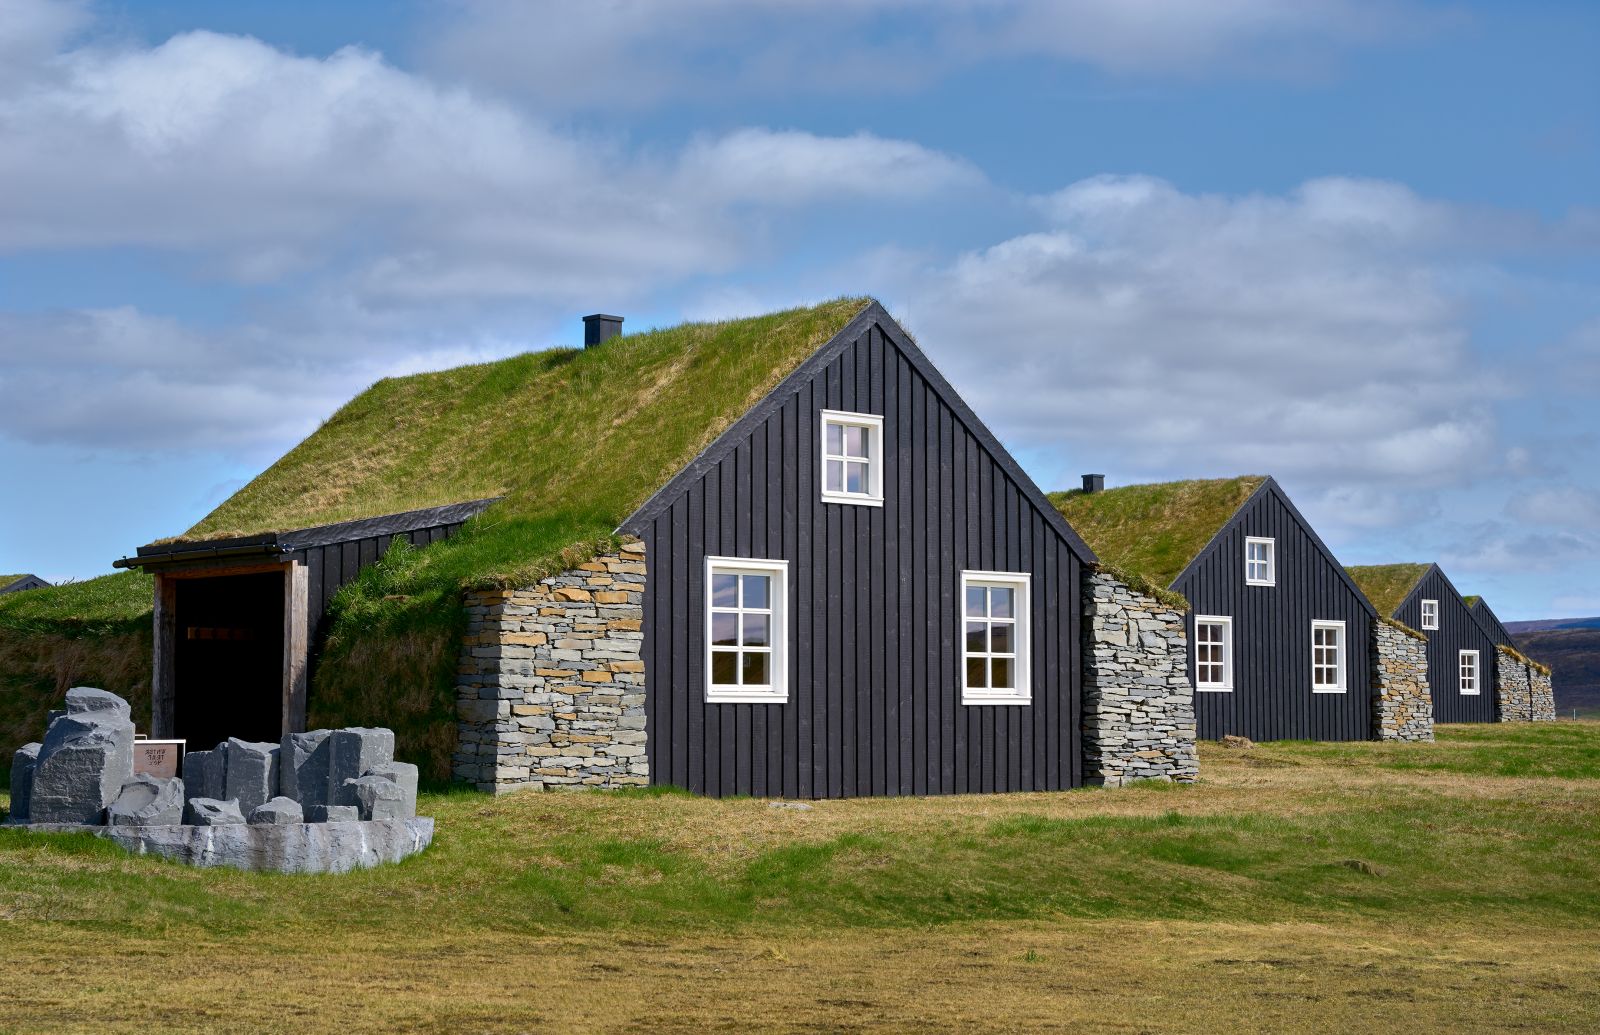 The turf covered roofs of the cottages at Torfhus Retreat hotel in Iceland